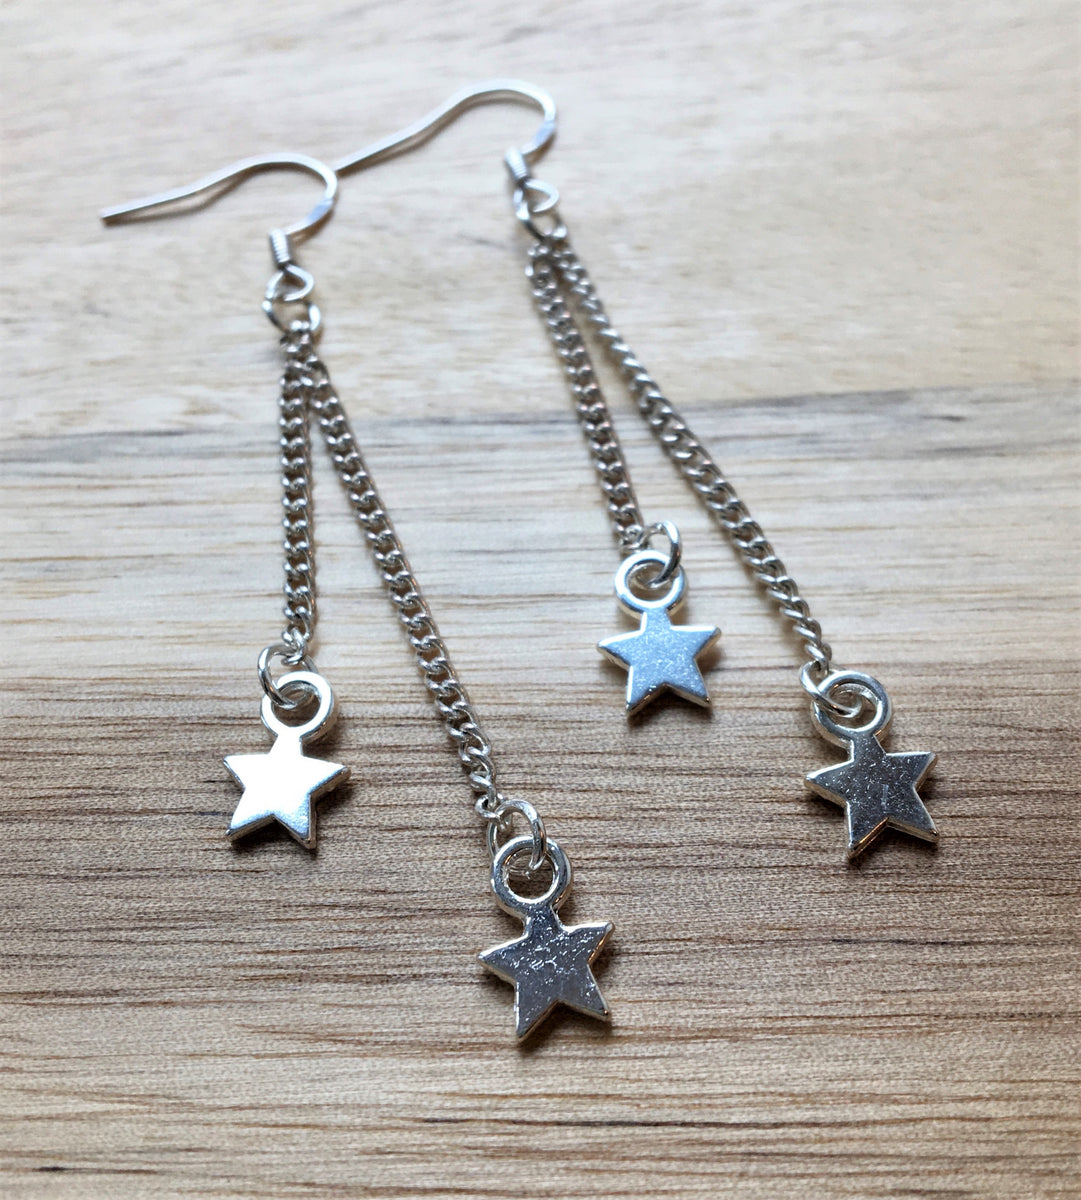 Silver dangle drop earrings - two link chains with star charms | eDgE ...